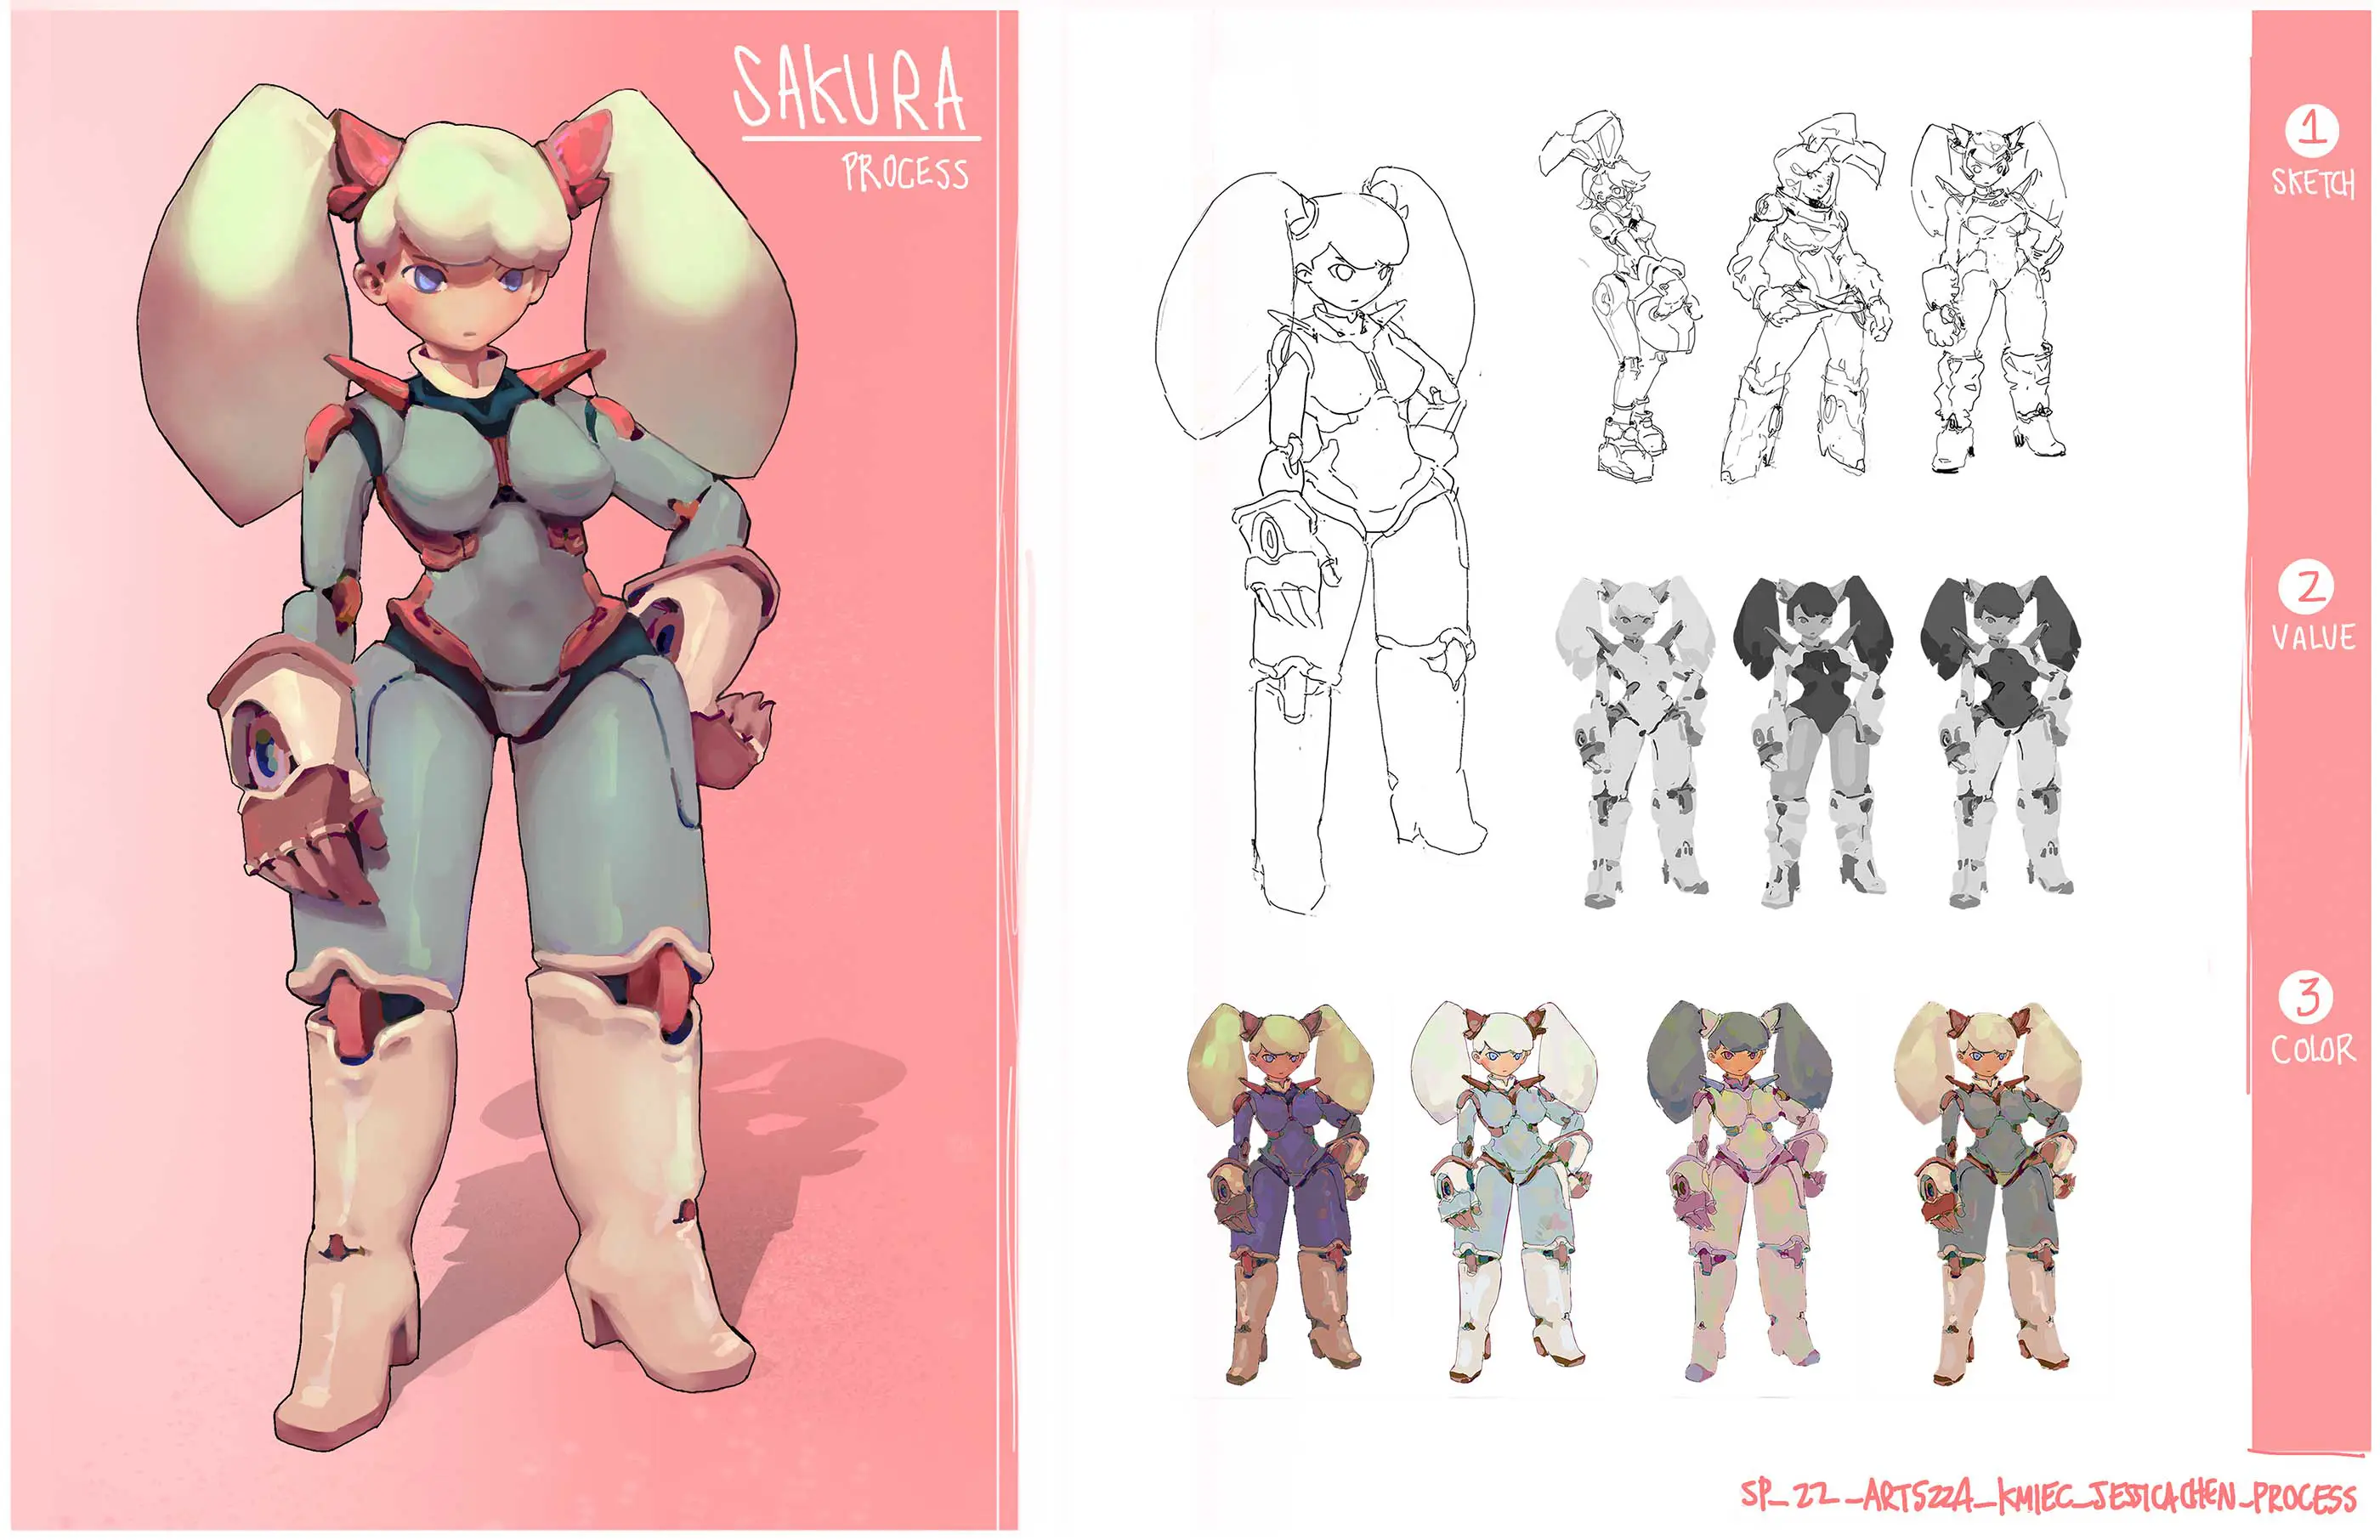 A drawing showing the process of creating a sci-fi character.